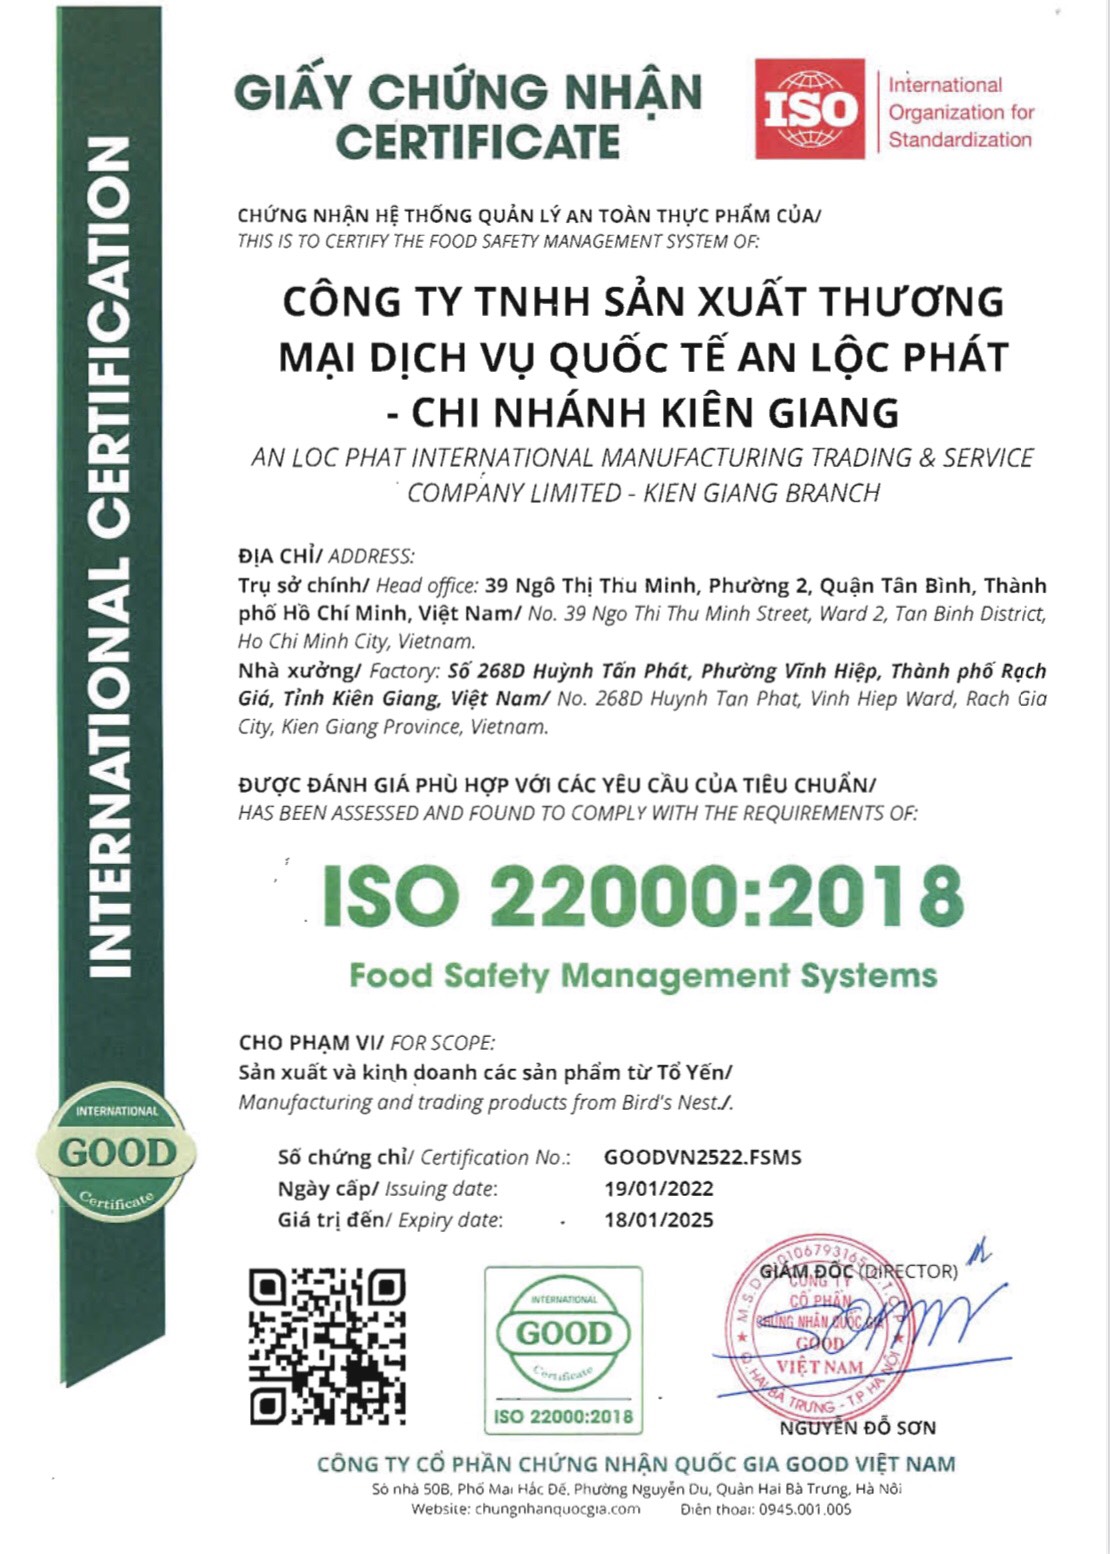 Iso 22000:2018